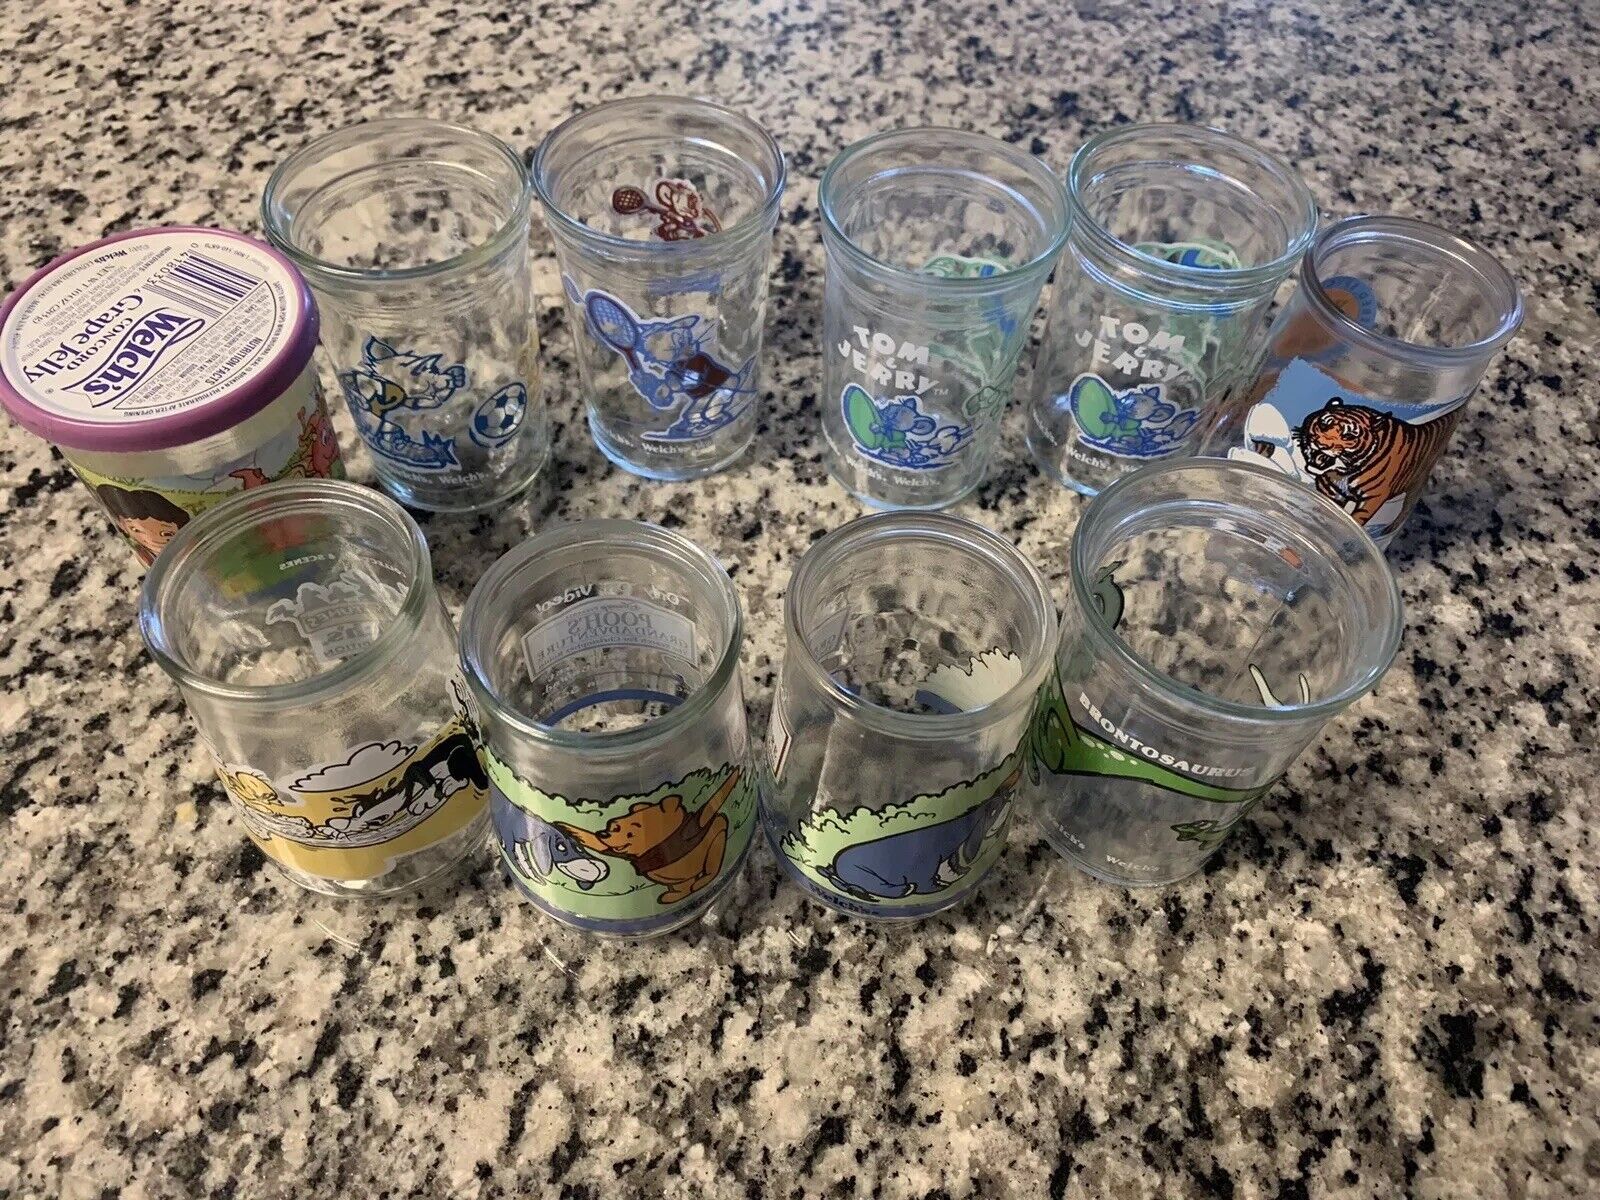 Mixed Lot of 10 Welch’s Jelly Jam 4” Jar Juice Glasses Pooh, Dragon Tales Etc.